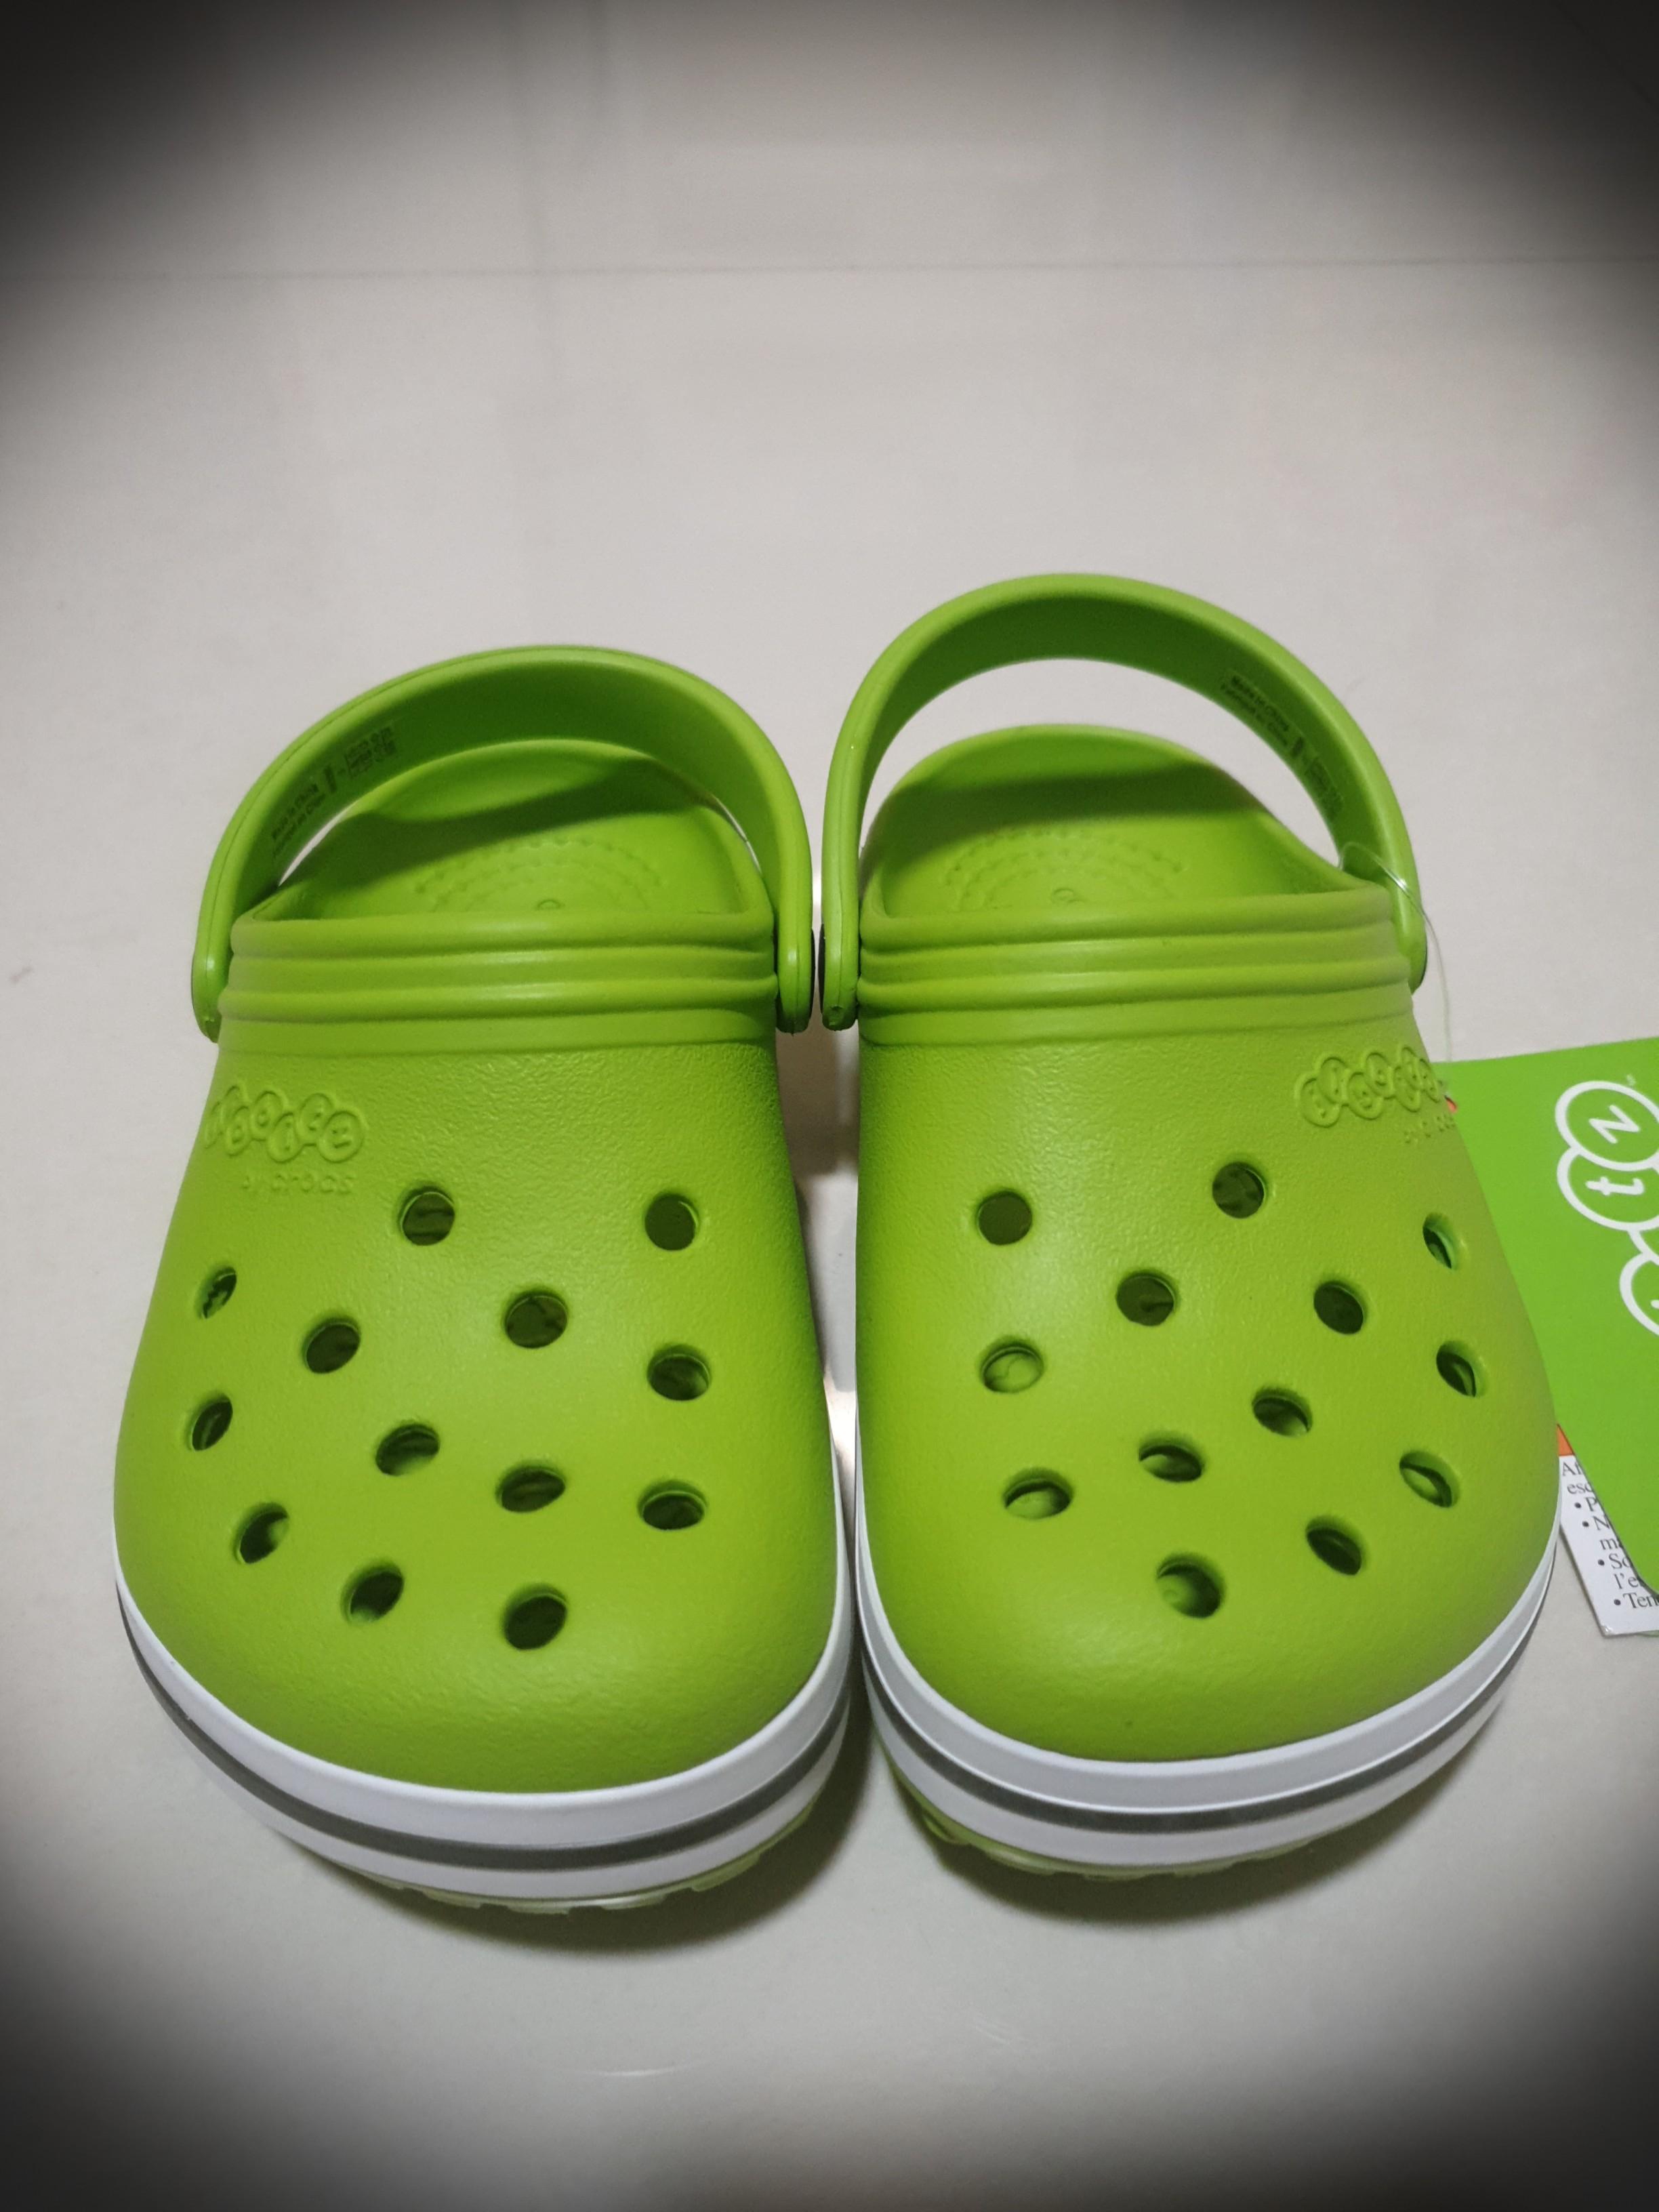 crocs size for 7 years old